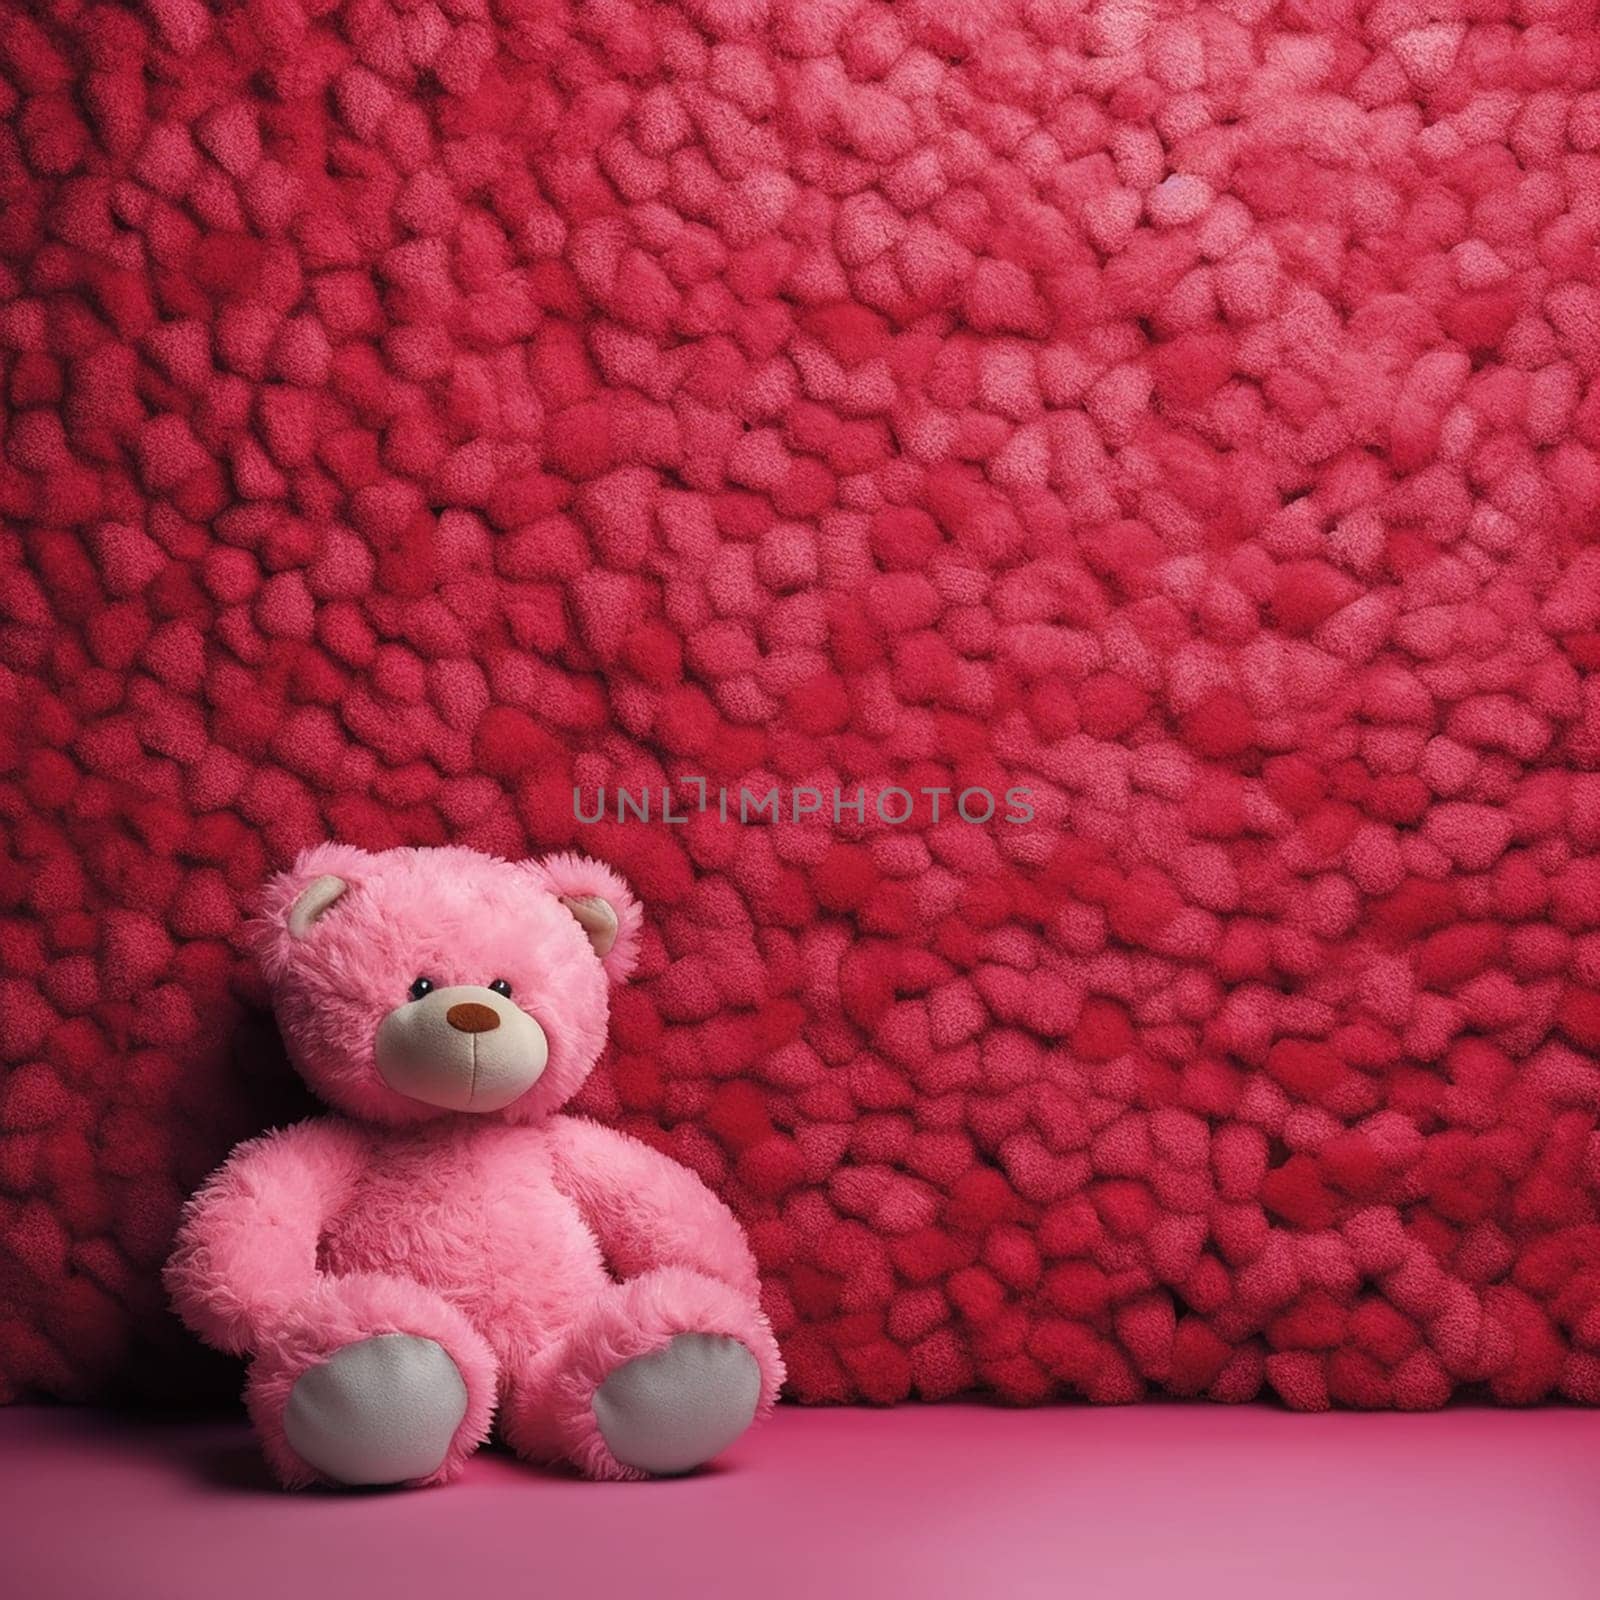 A pink teddy bear against a textured pink background by Hype2art